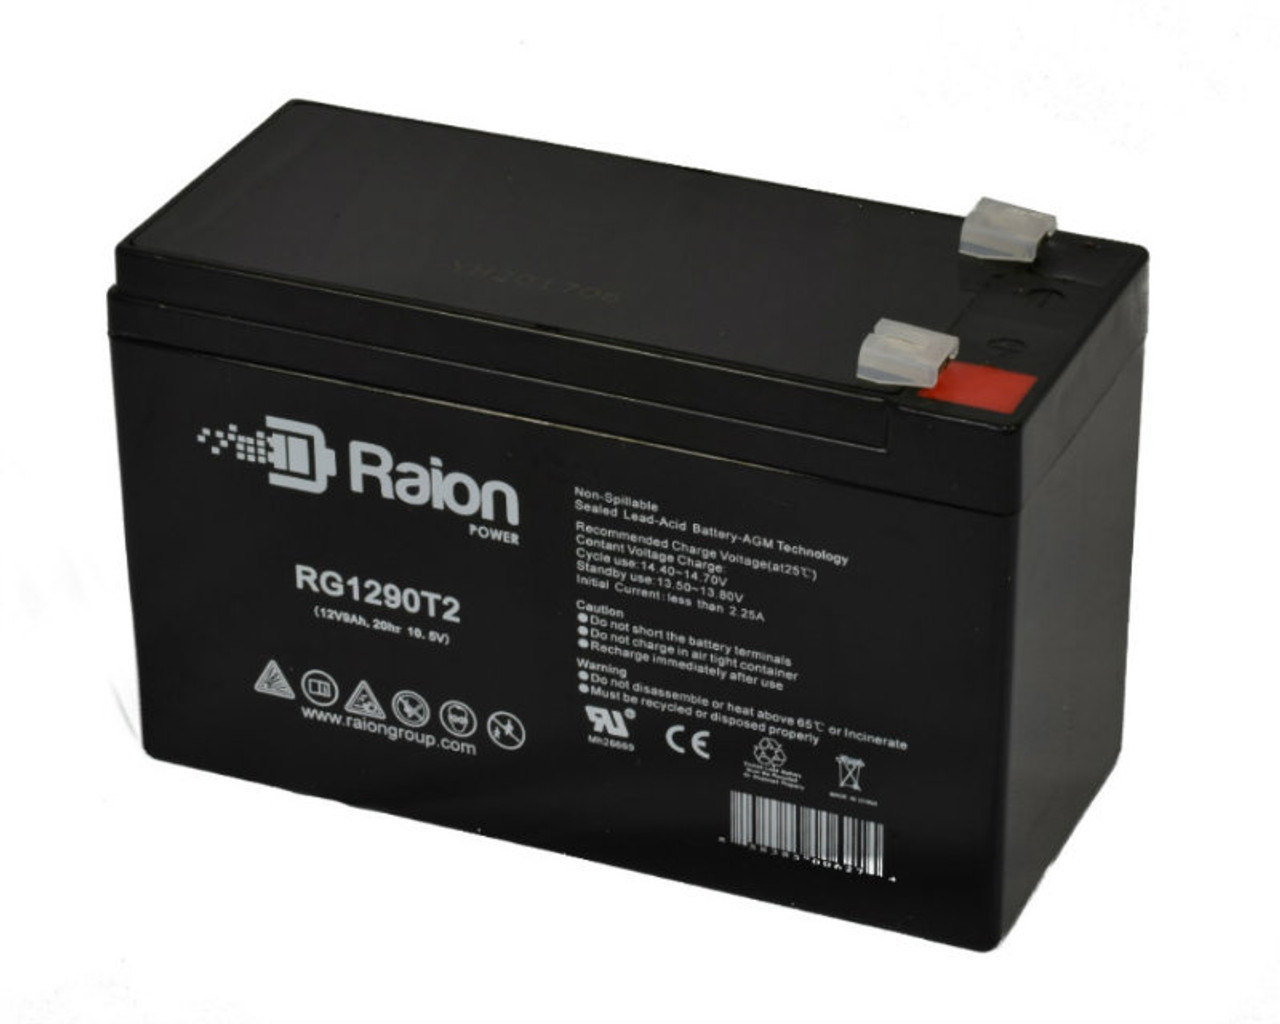 Raion Power RG1290T2 12V 9Ah AGM Battery for Silver Bomber Scooter